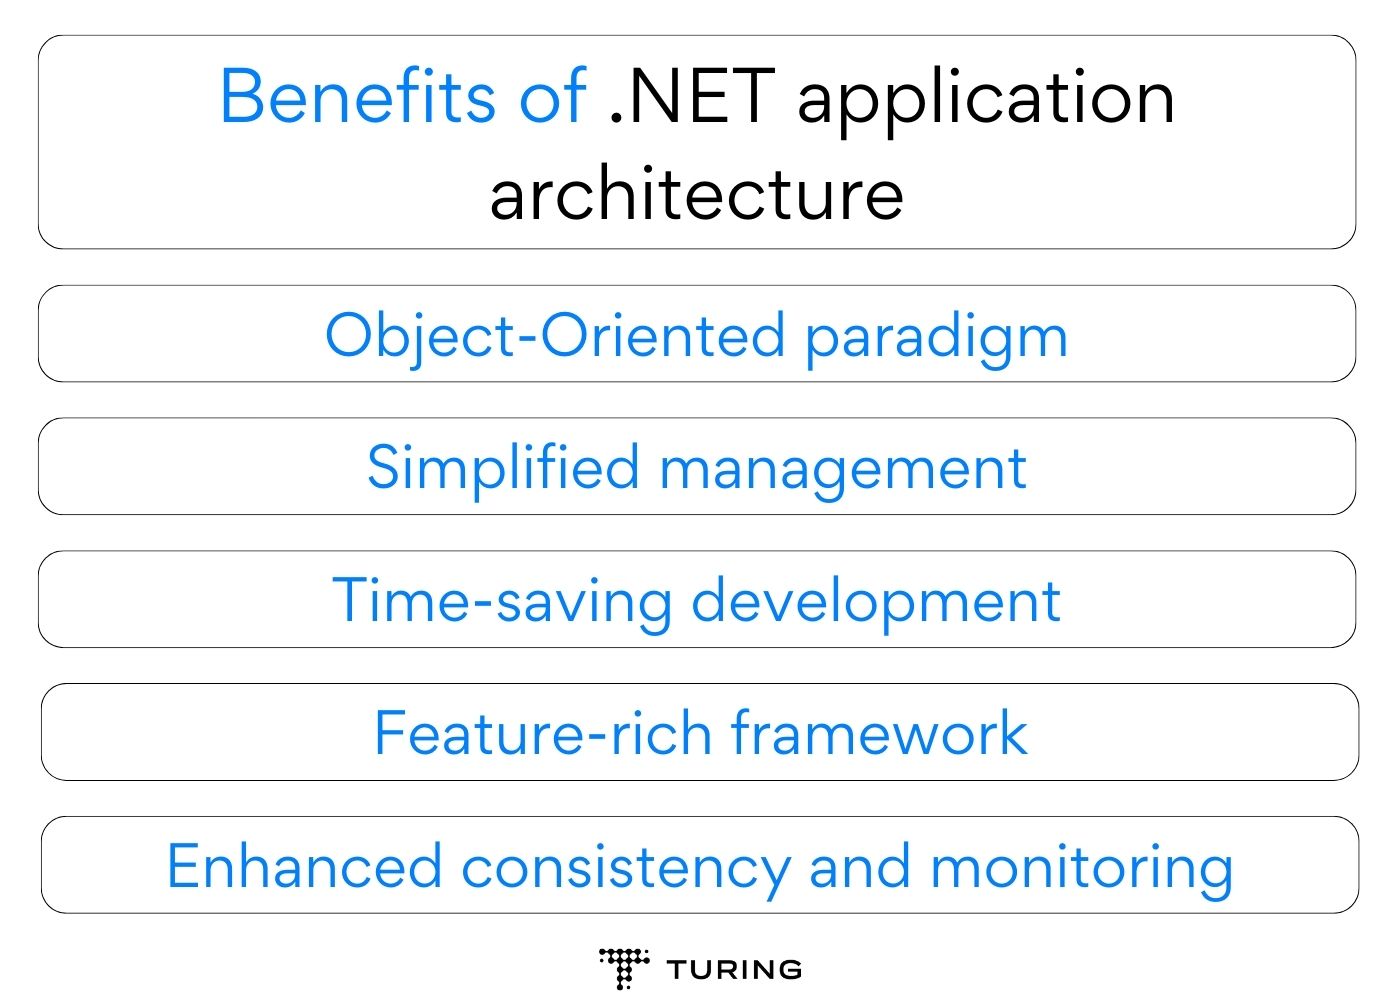 Benefits of .NET application architecture